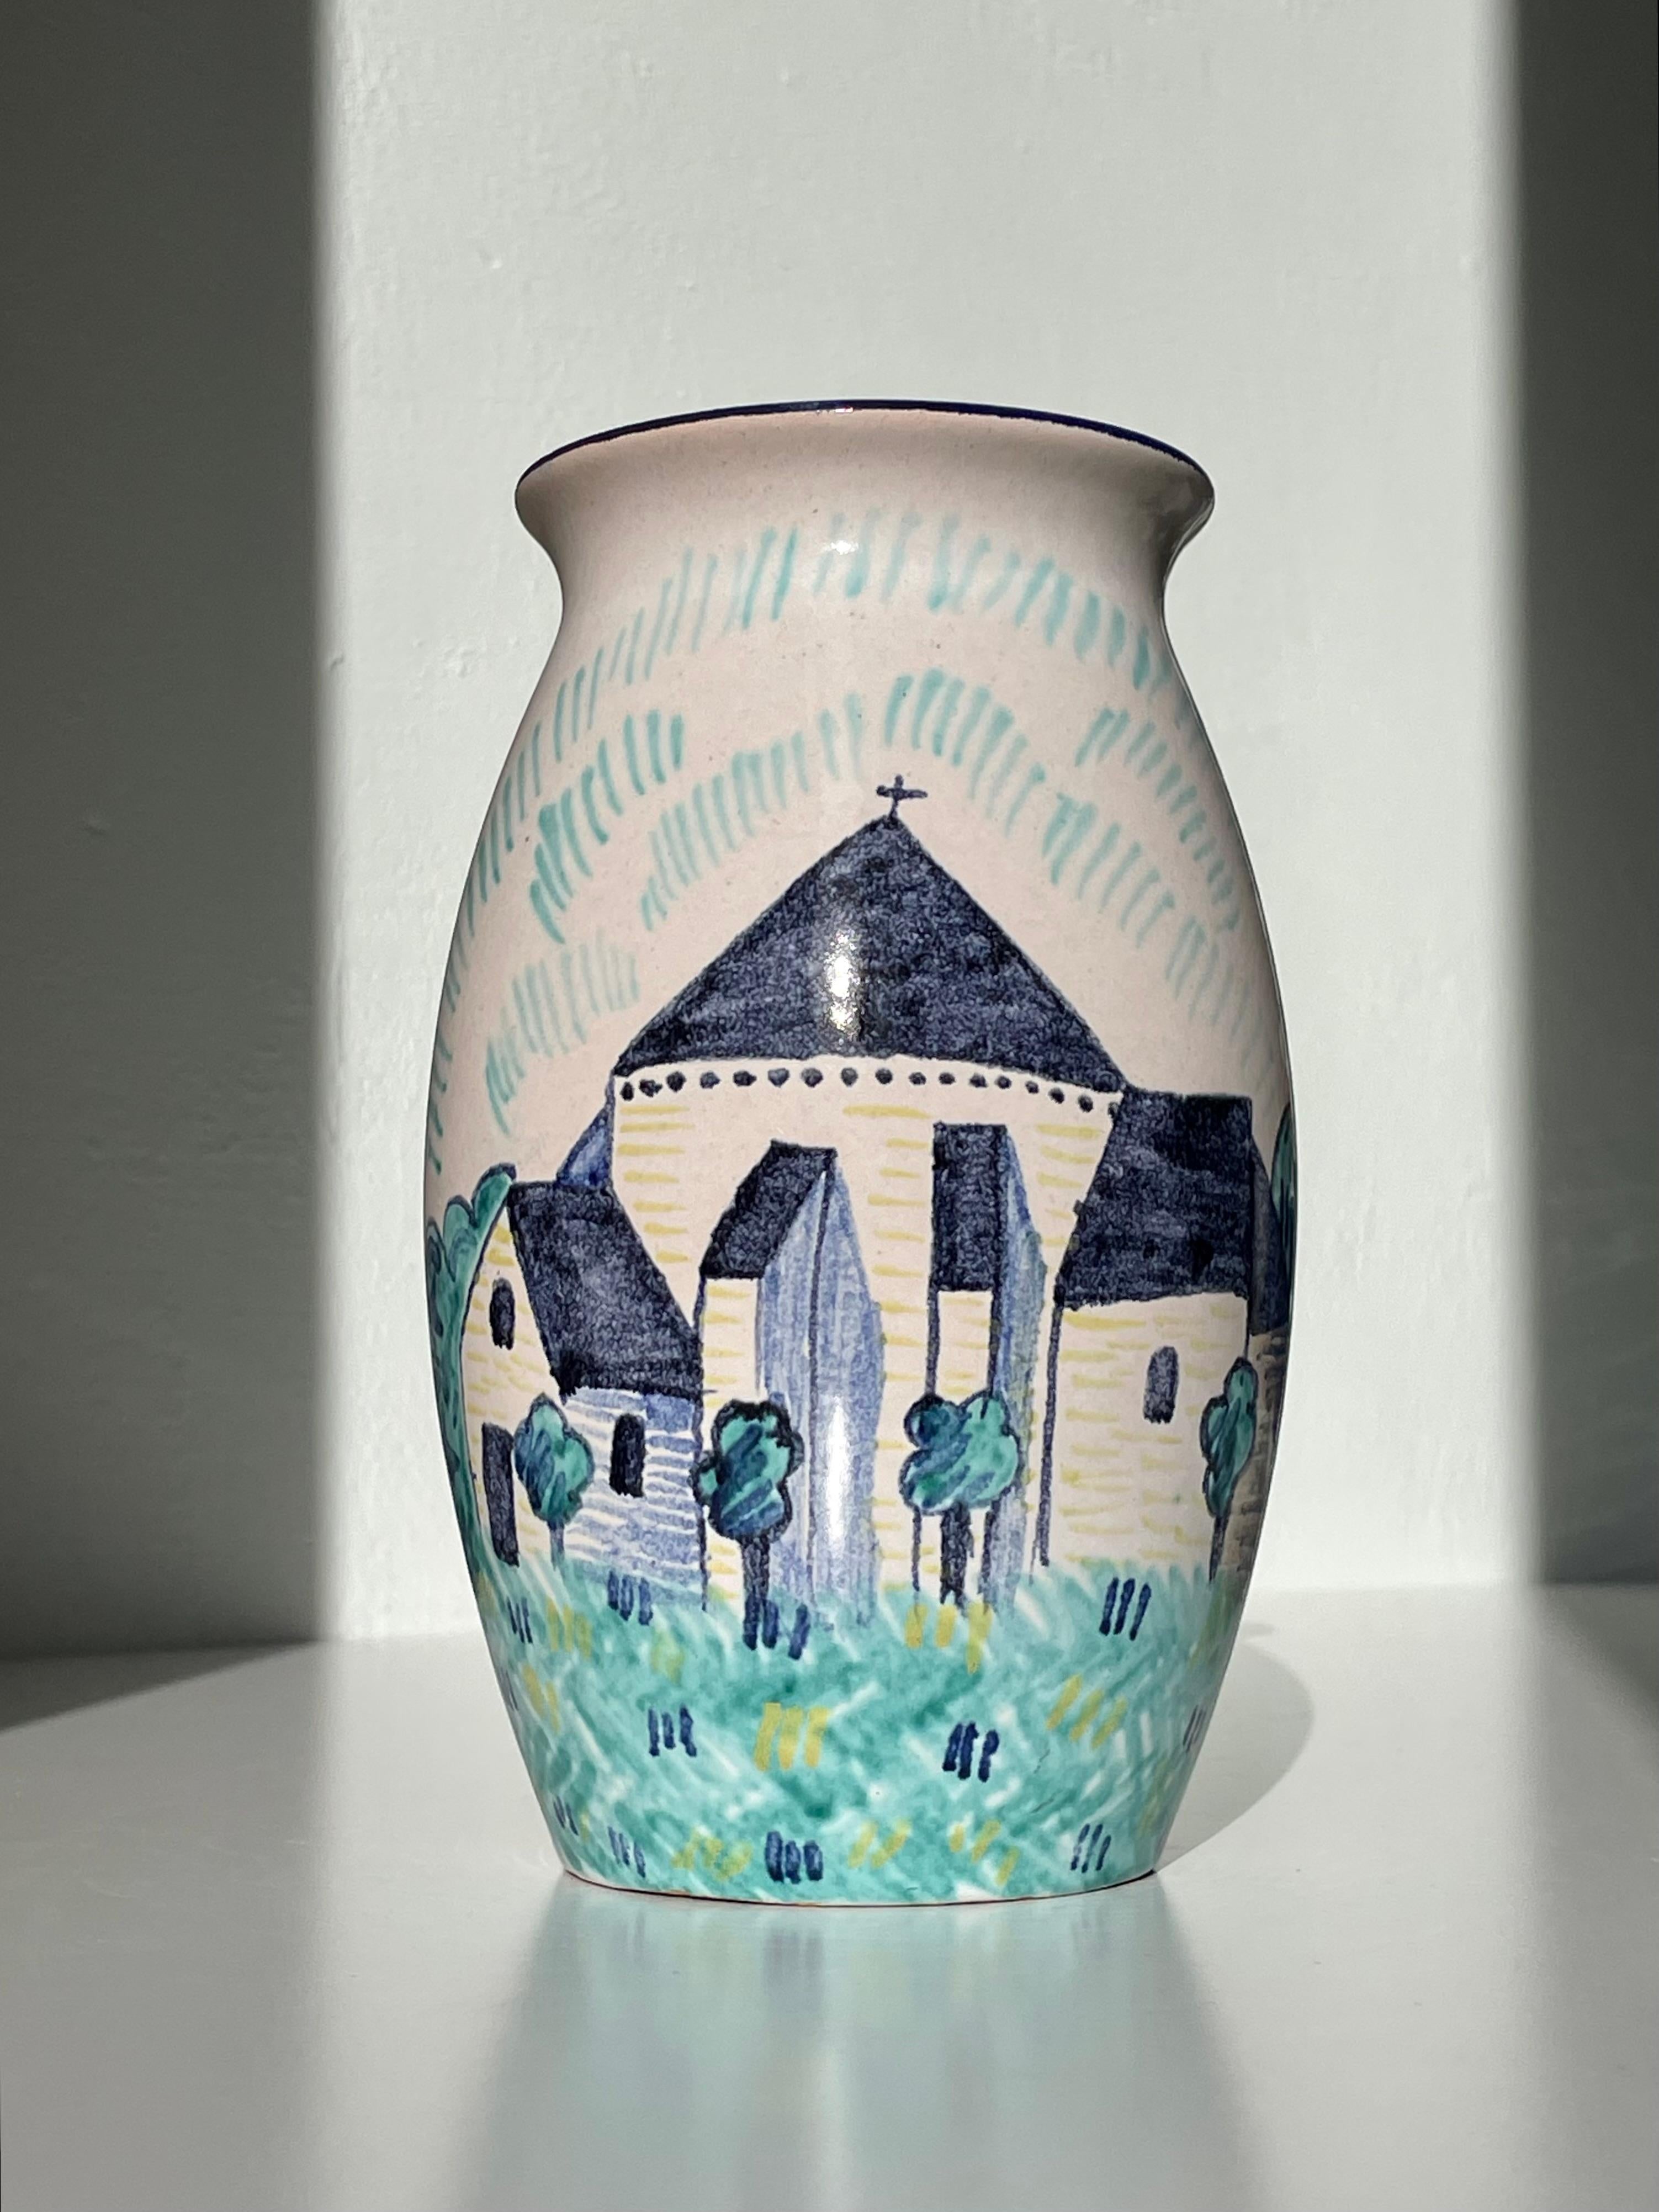 Unusually large piece from Søholm’s series of vases decorated with images of local buildings on the island of Bornholm where Søholm was based. This item depicts one of the four famous white medieval round churches still standing on Bornholm.